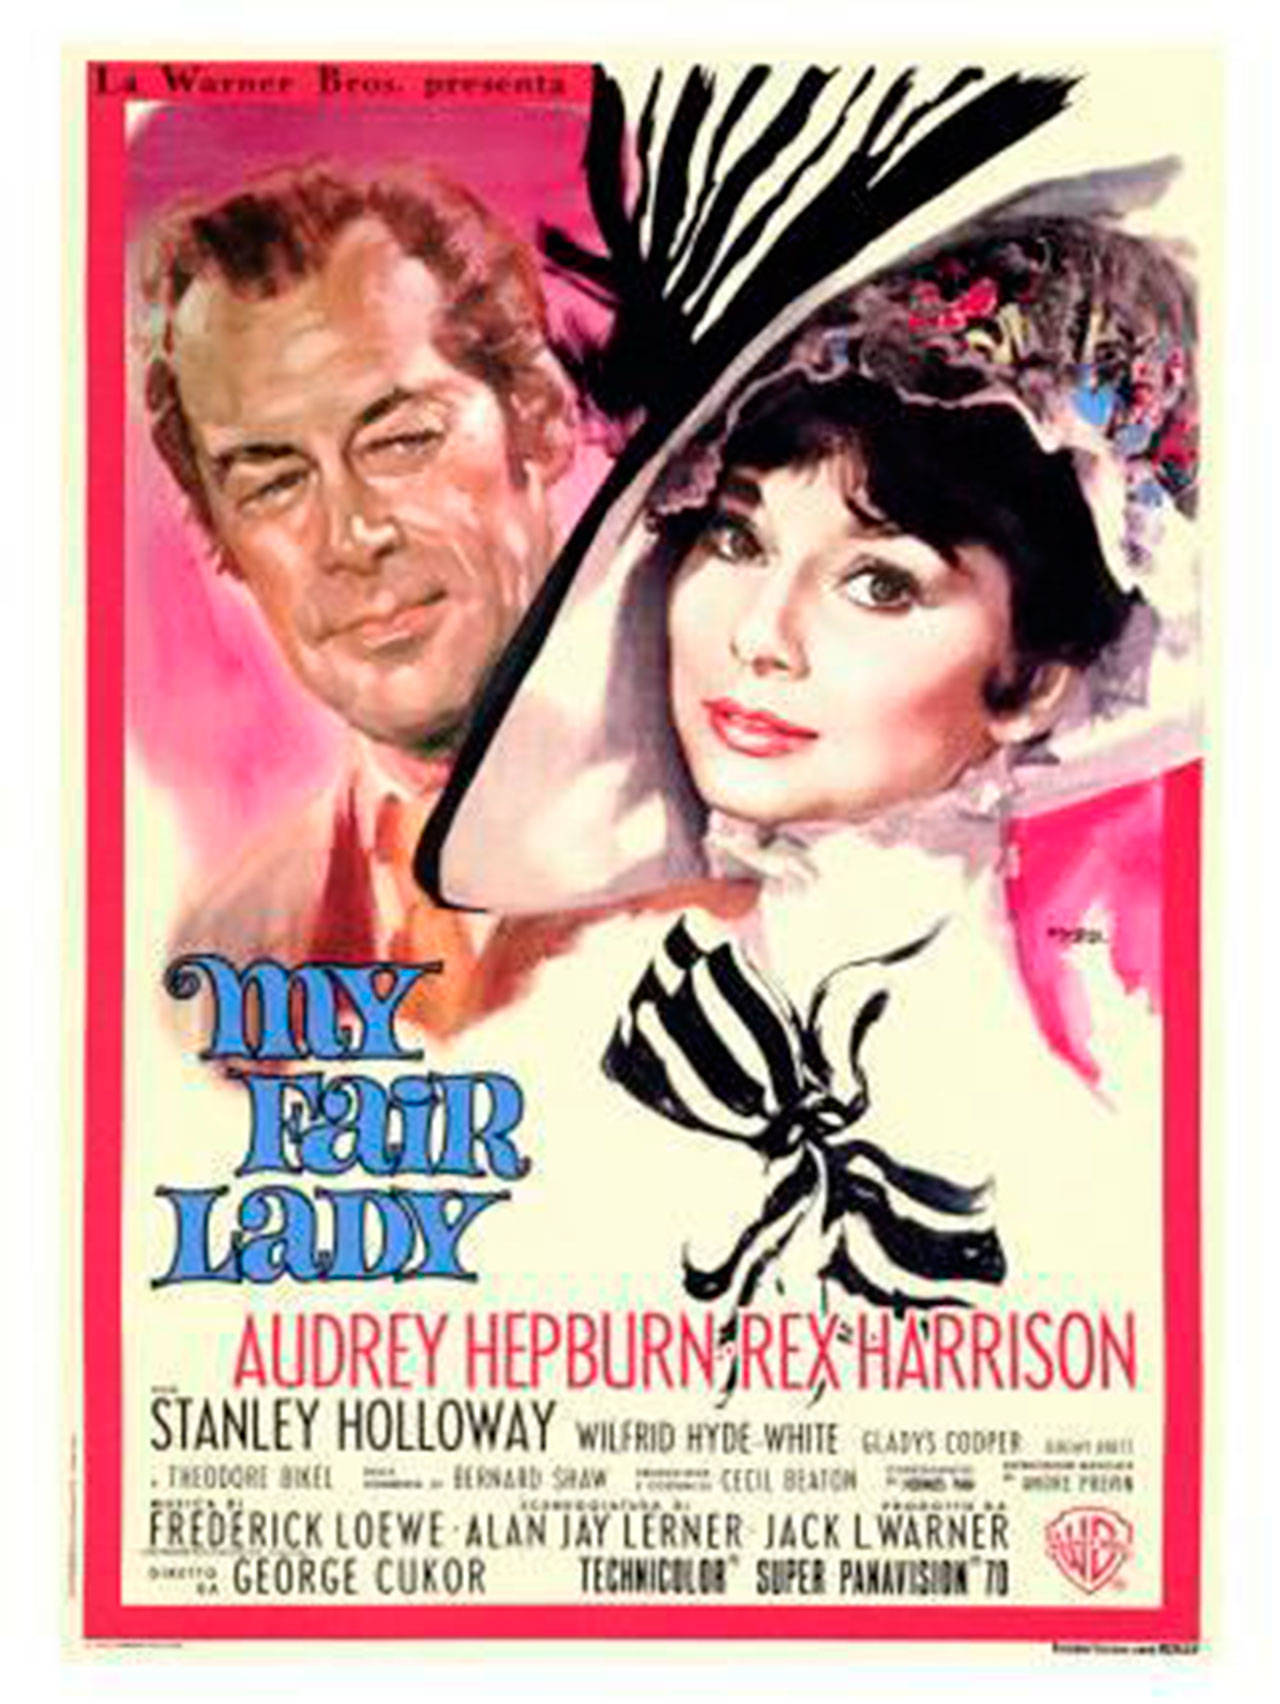 The 1964 musical drama “My Fair Lady” will return to the big screen at Bainbridge Cinemas for a special one-night-only 55th anniversary revival at 7 p.m. Wednesday, Feb. 20.                                Image courtesy of Warner Bros. Pictures